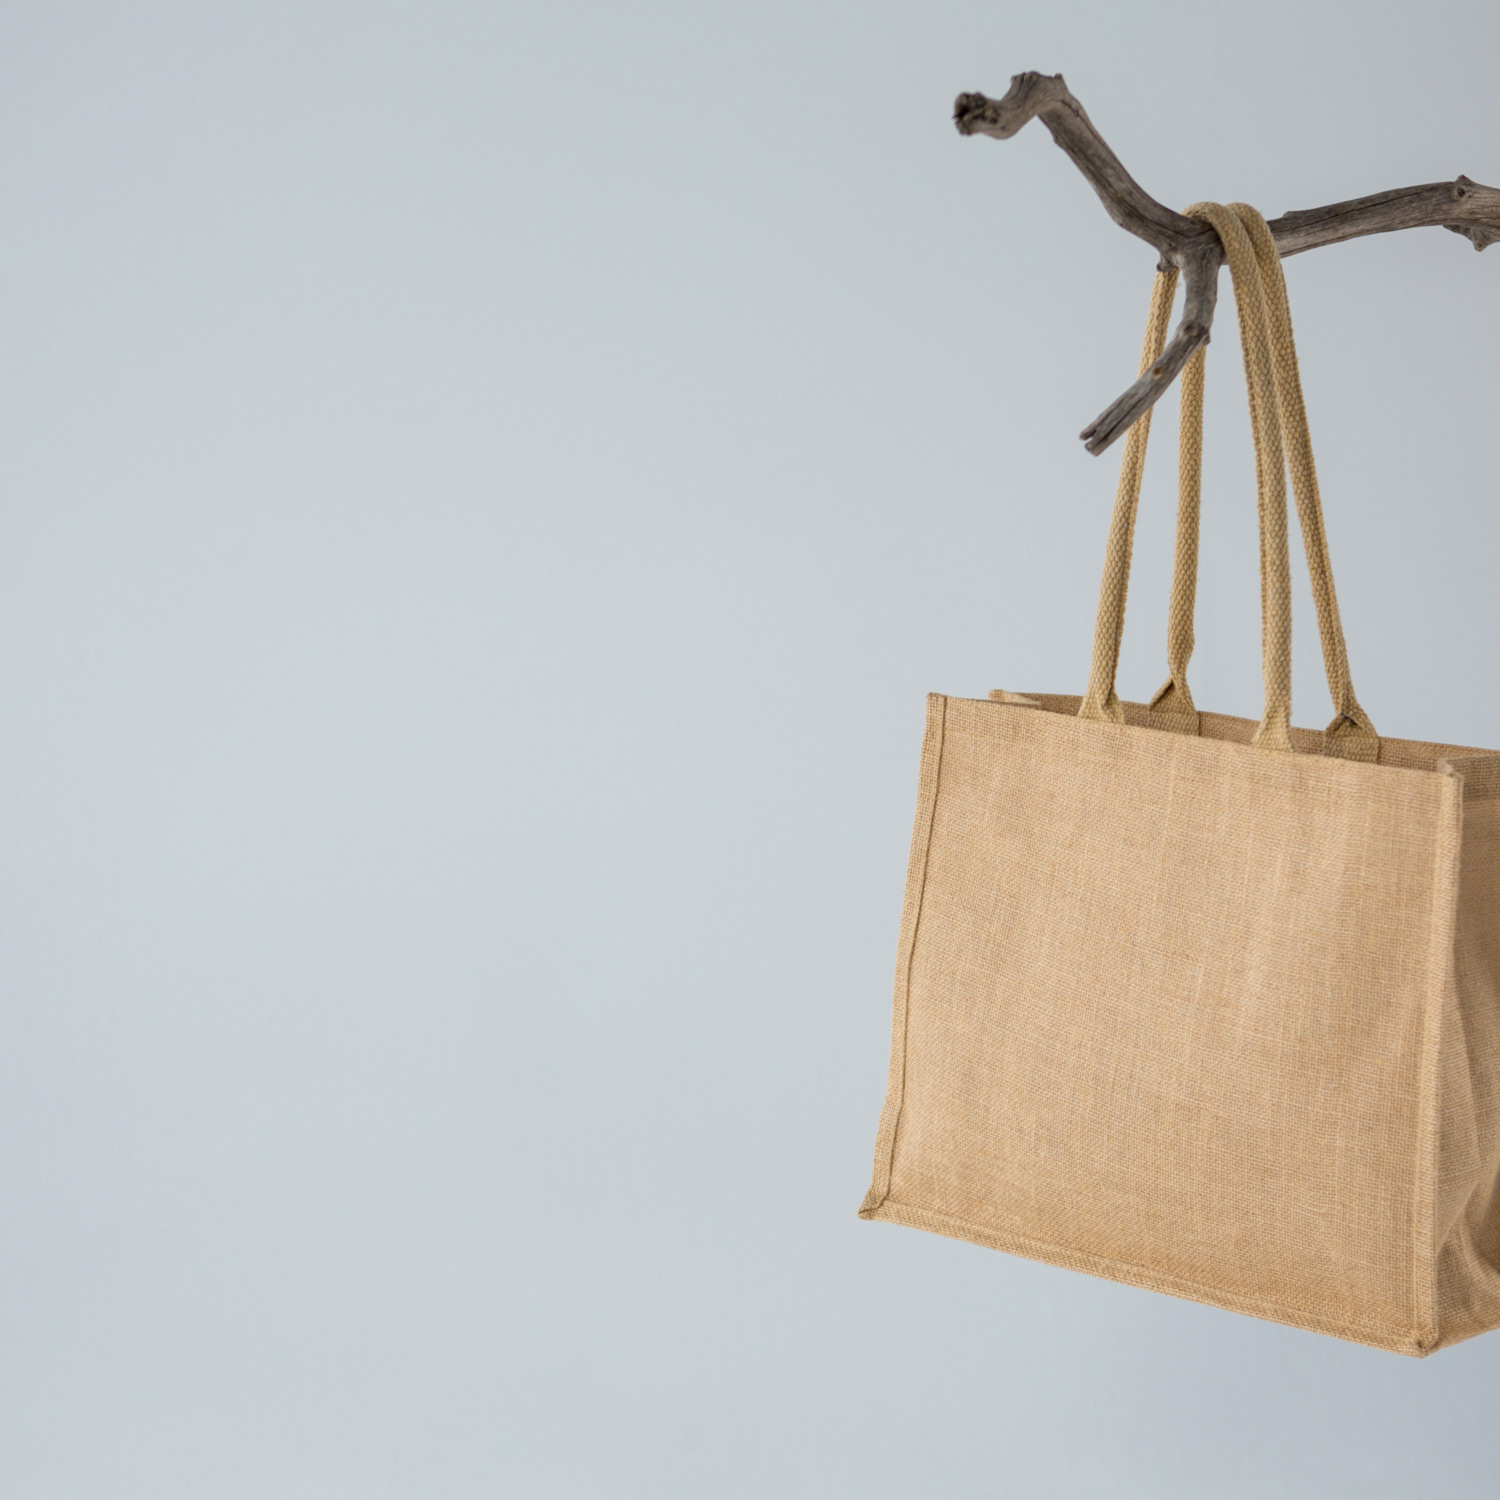 Jute carrier bags: sustainable shopping at its best